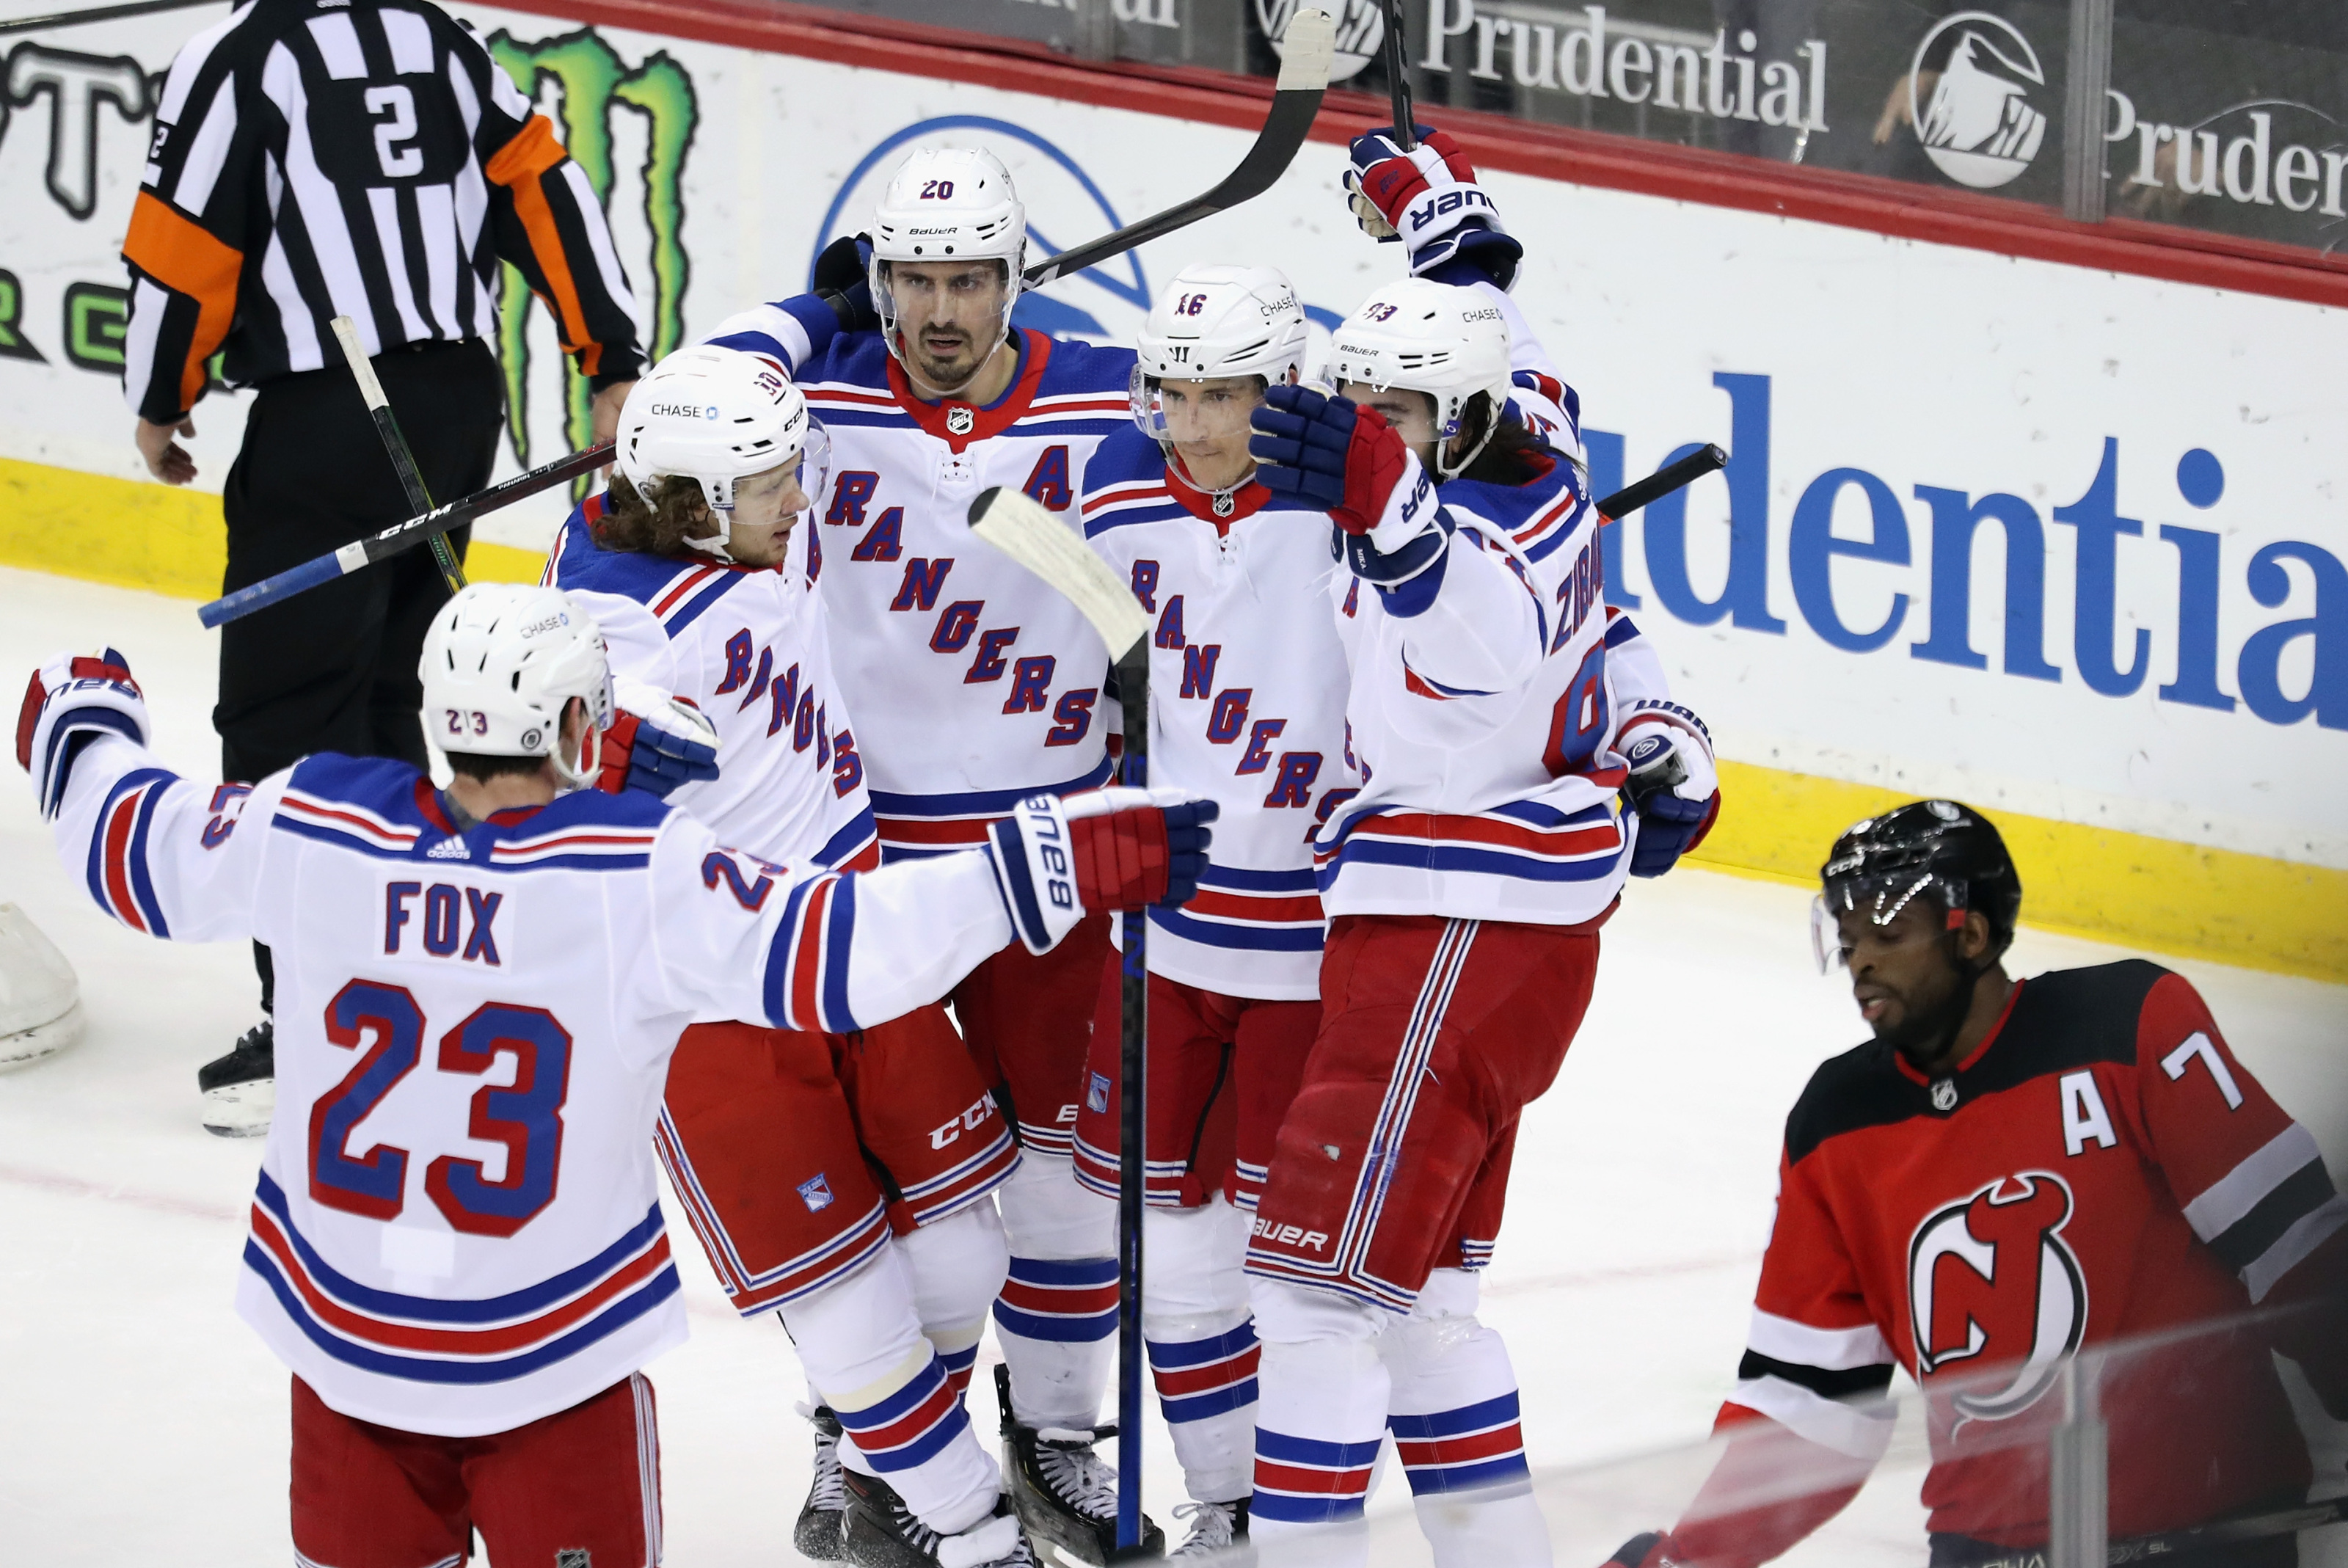 New York Rangers on X: Your #NYR starting lineup